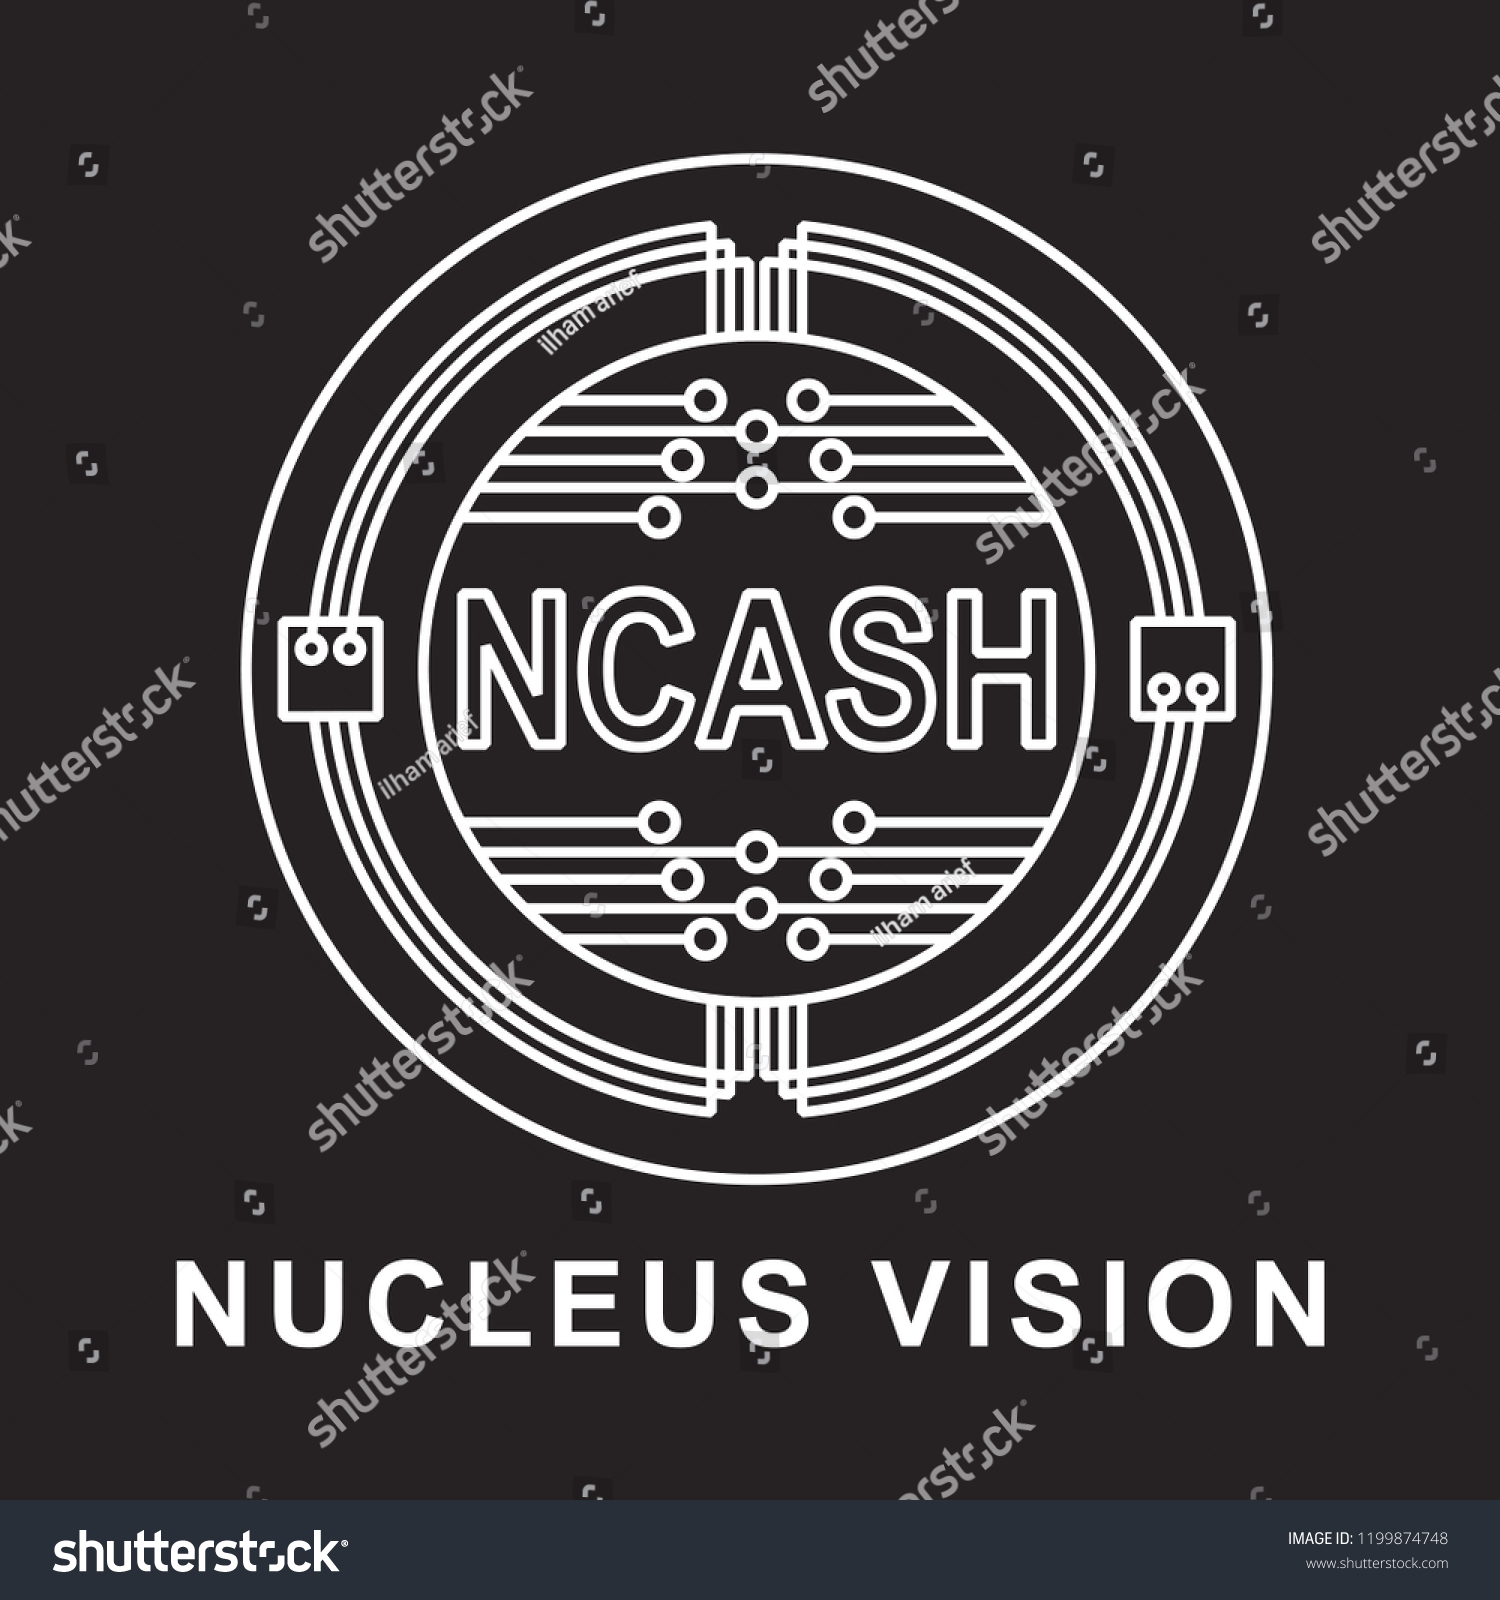 nuclear vision cryptocurrency